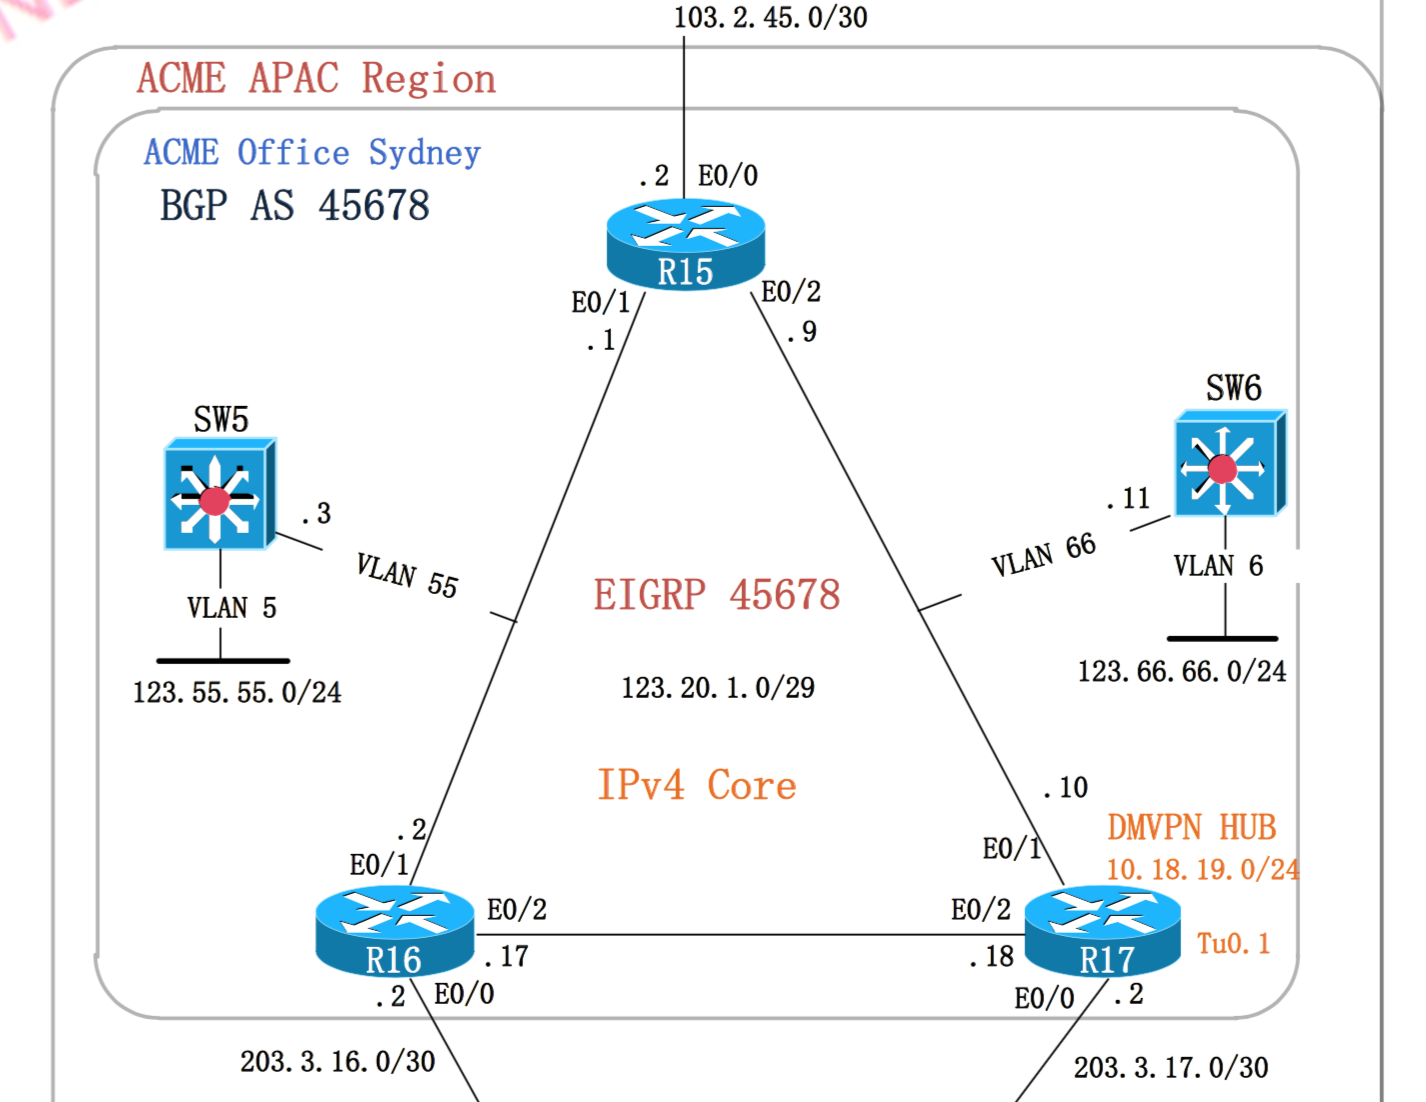 CCIE RS V5考试LAB1实验详解：Section 2.3 EIGRP in AS45678